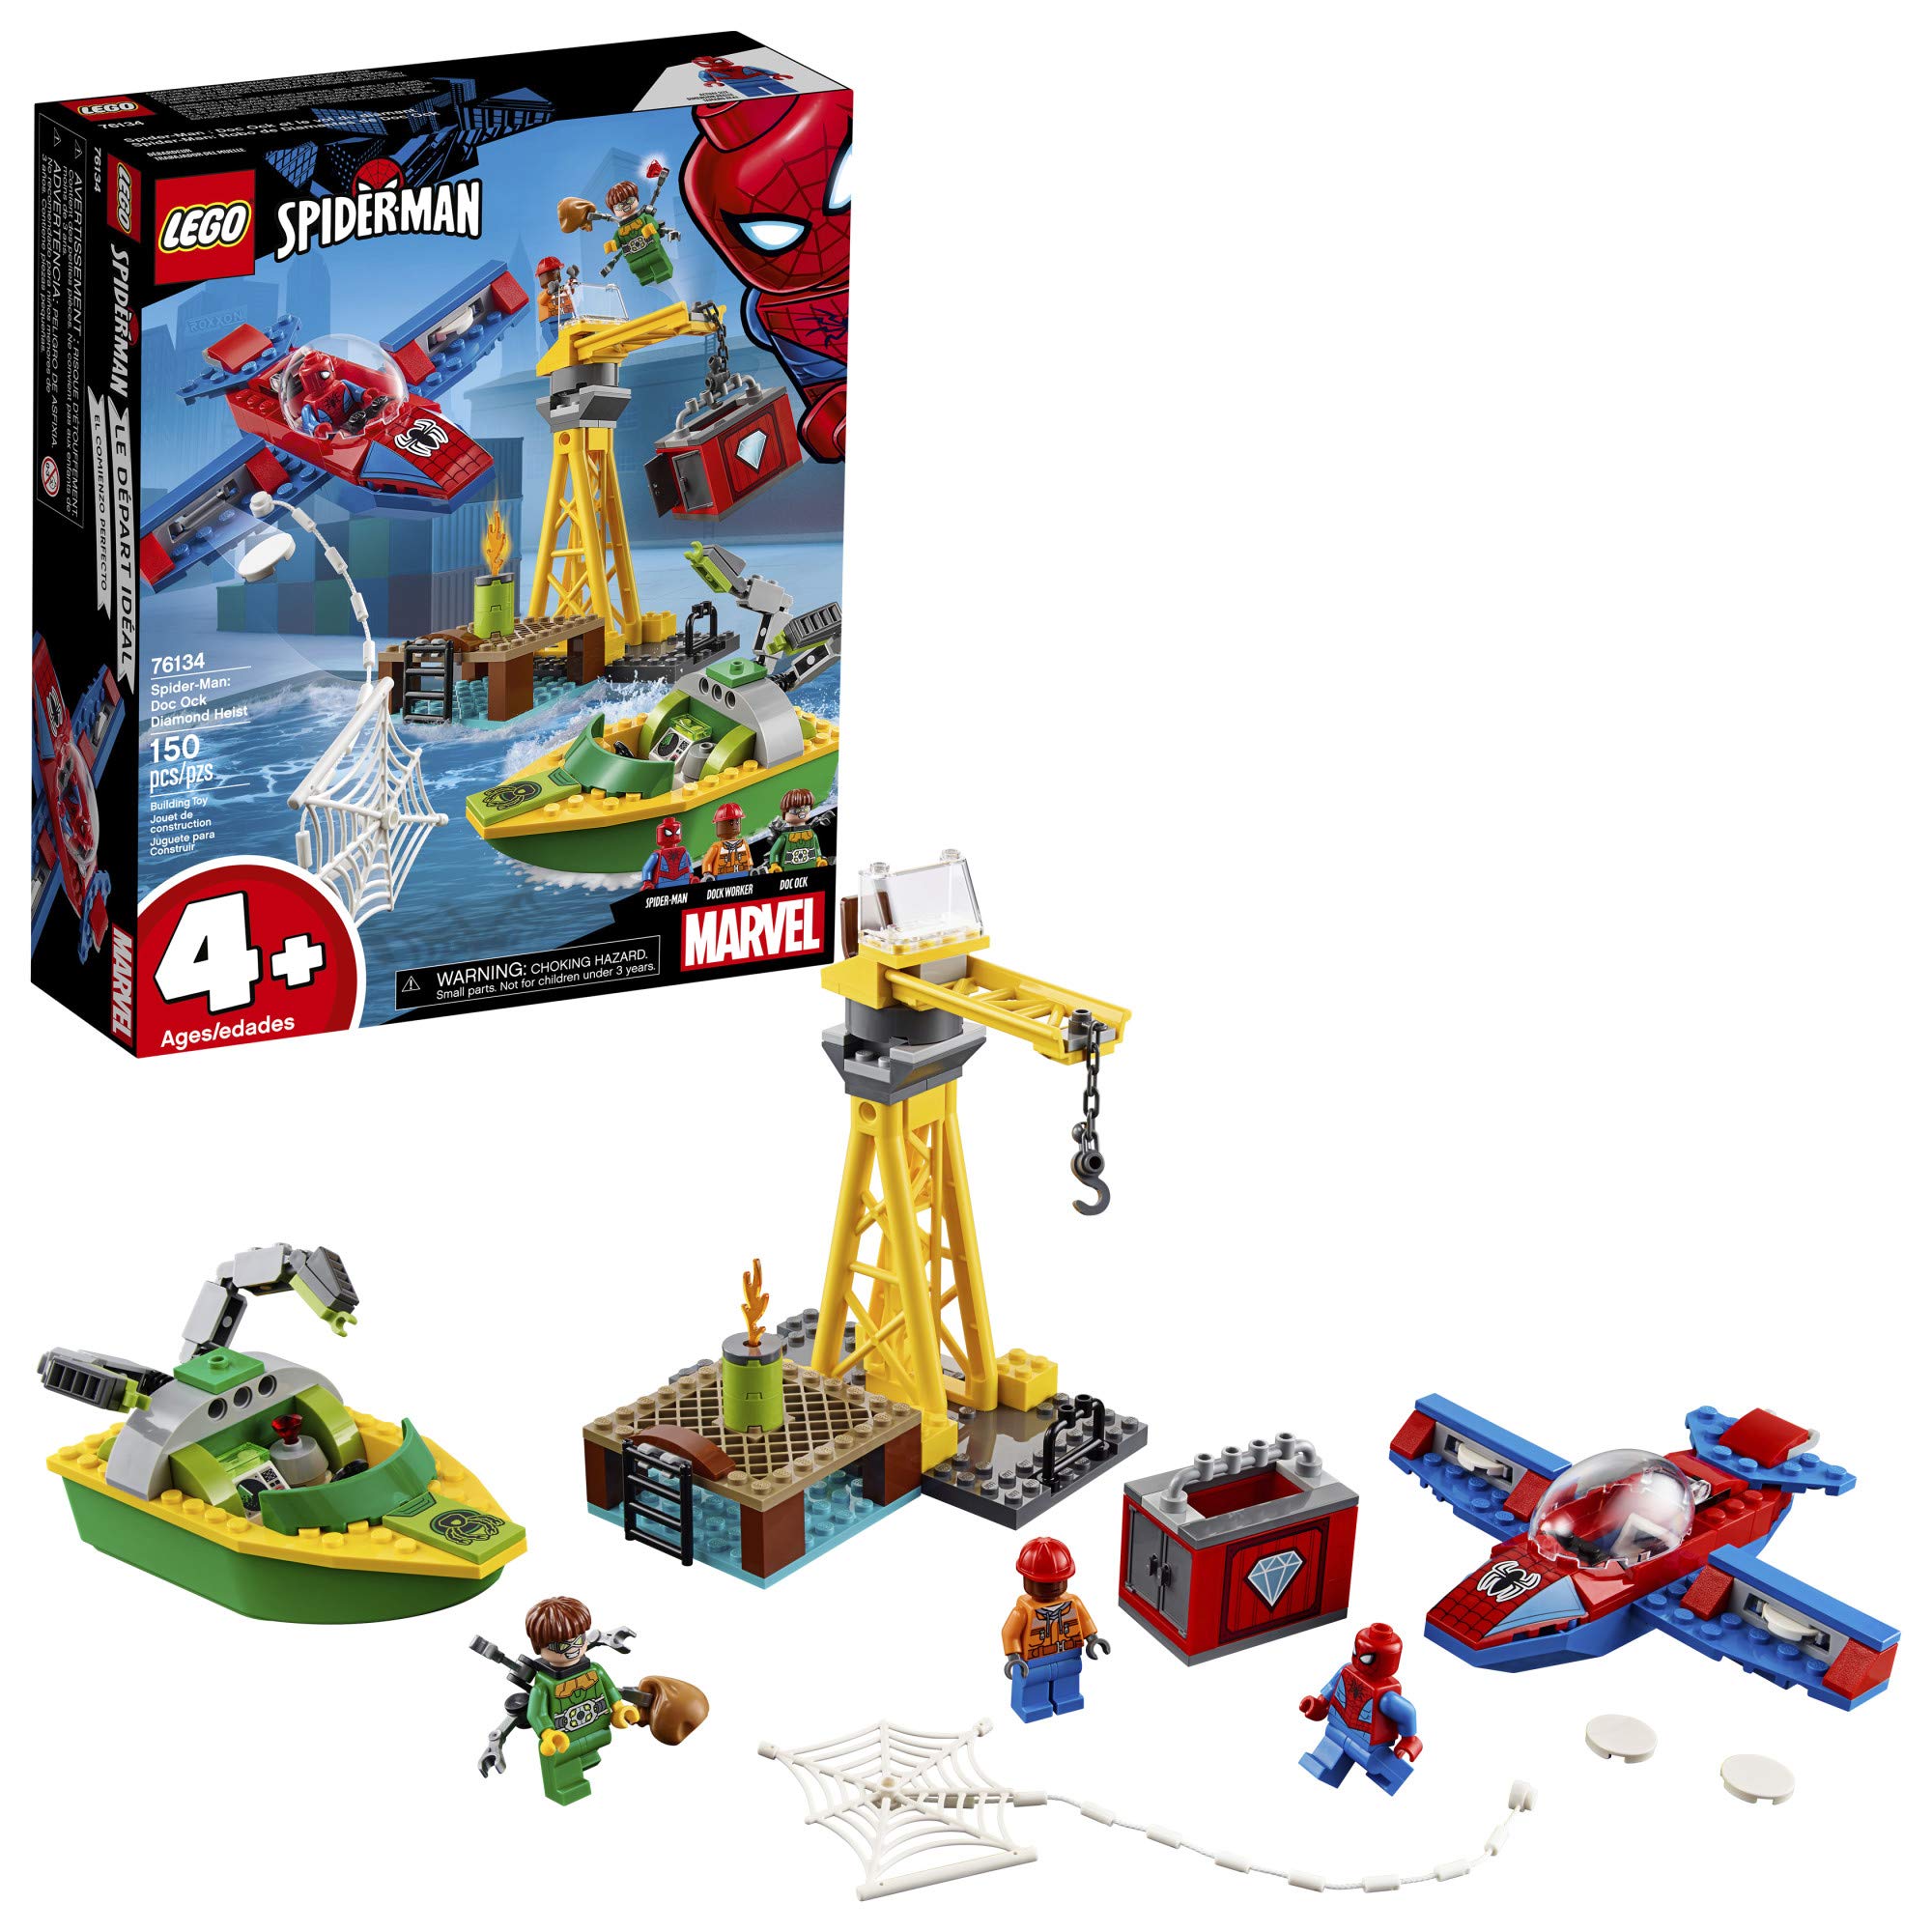 Book Cover LEGO Marvel Spider Man Spider-Man: Doc Ock Diamond Heist 76134 Building Kit (150 Pieces) (Discontinued by Manufacturer)